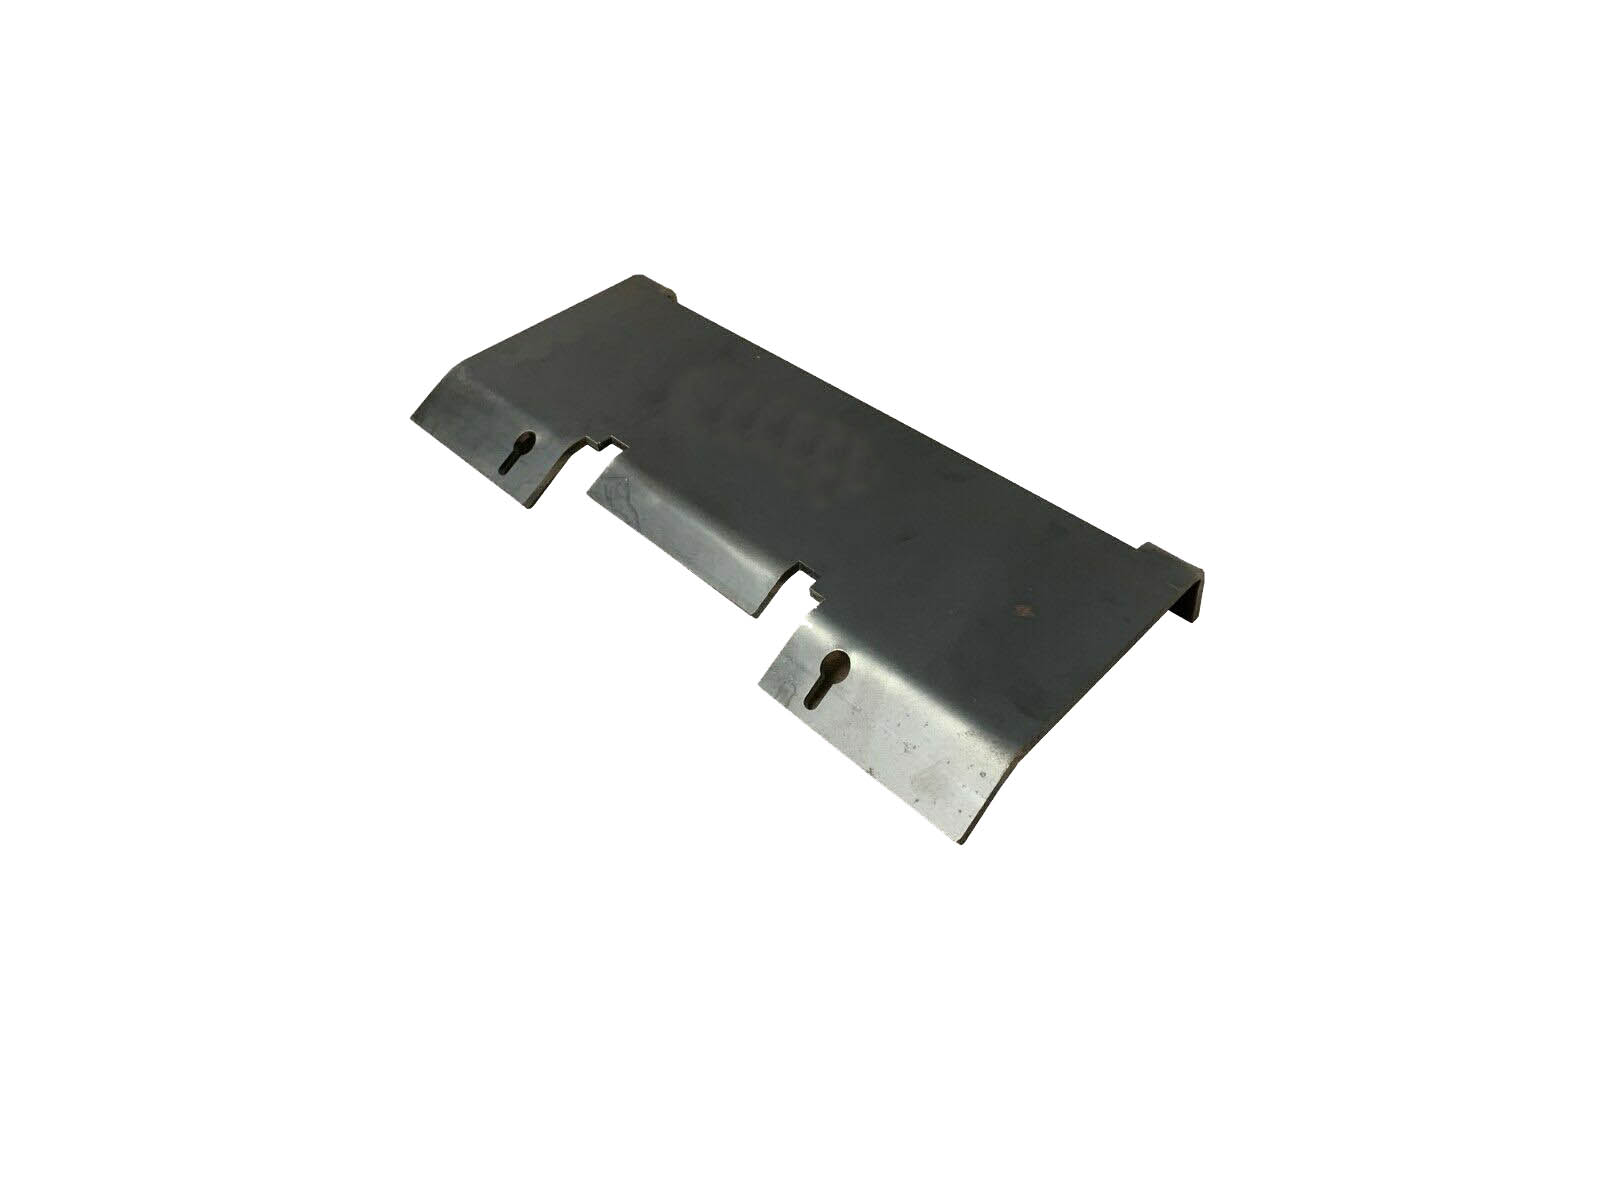 Tiger Inset Baffle Plate 